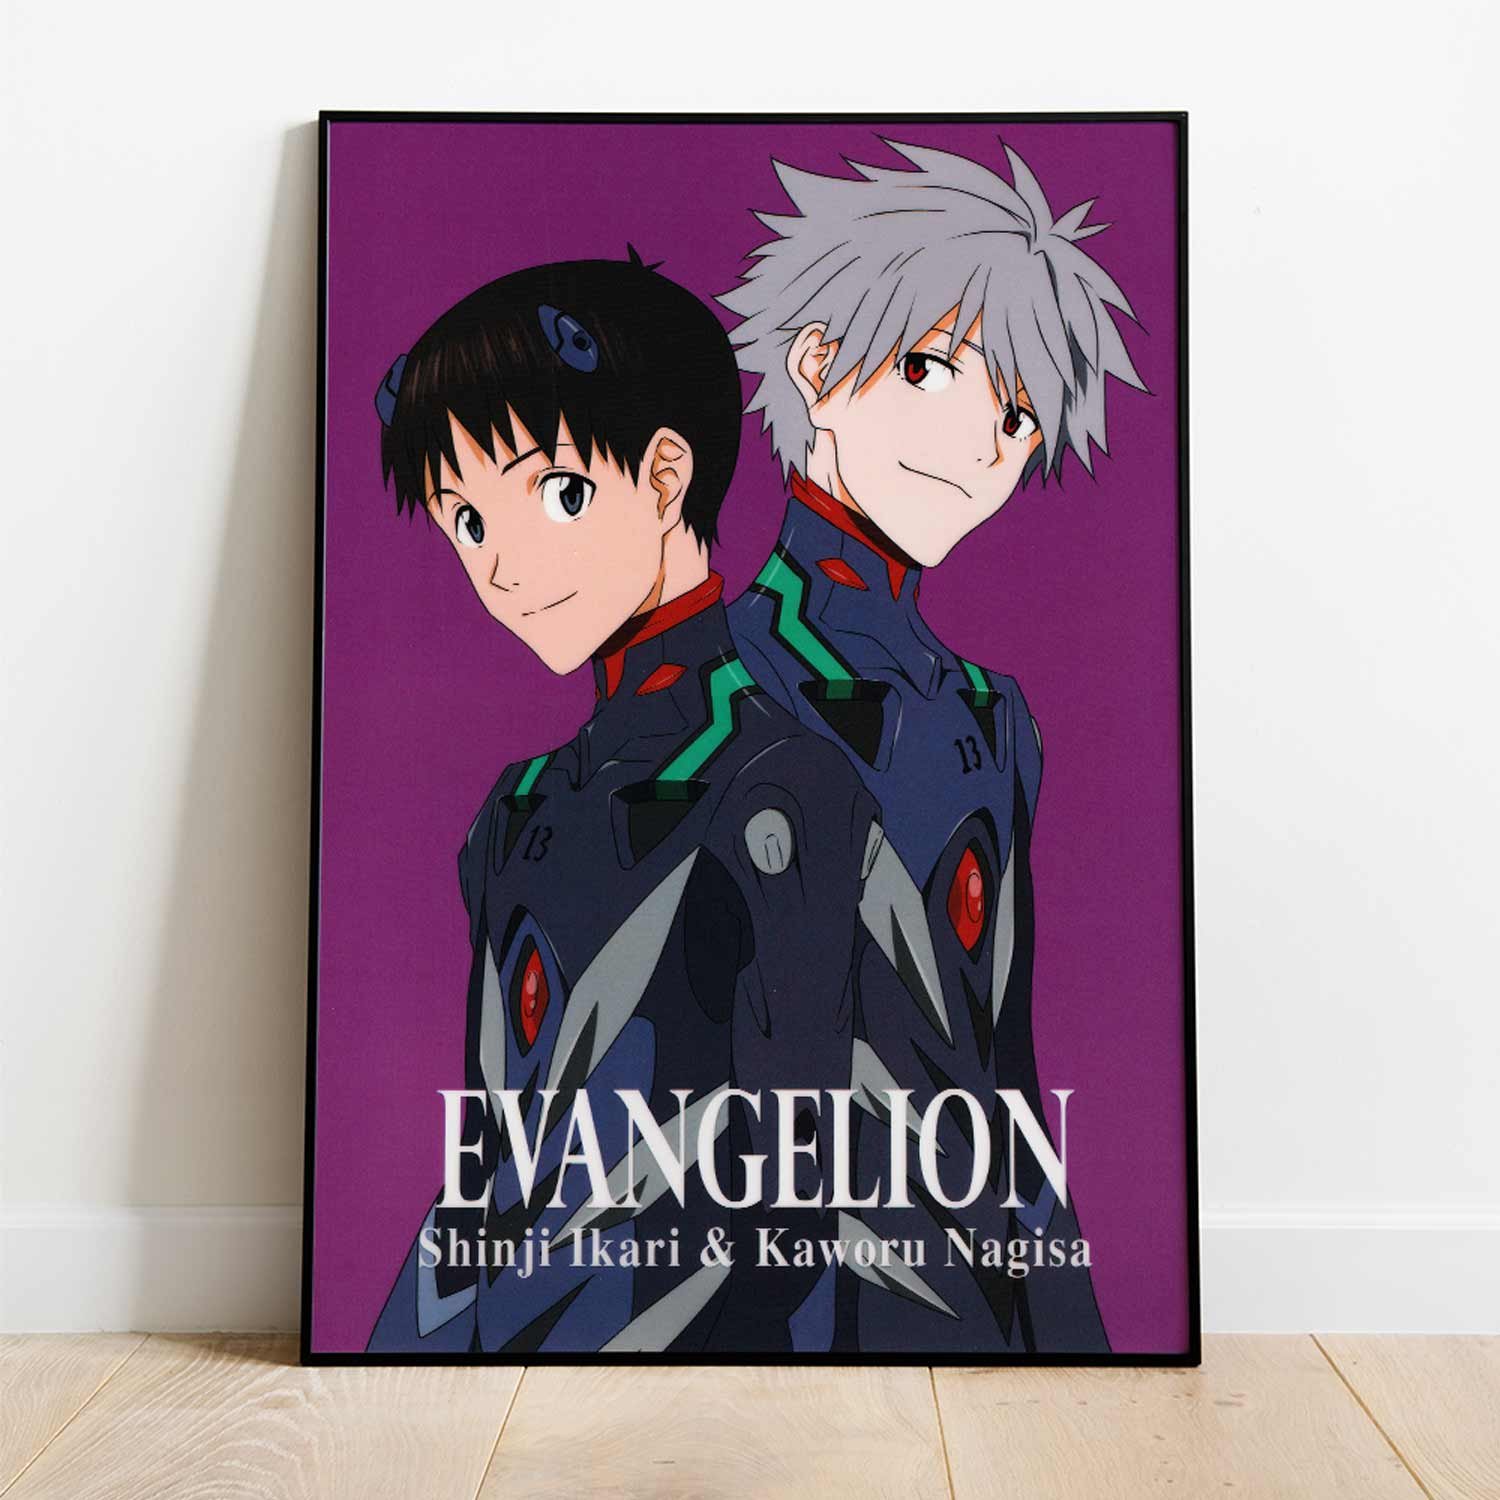 Neon Genesis Evangelion what the powerful anime really means in 2020   Polygon